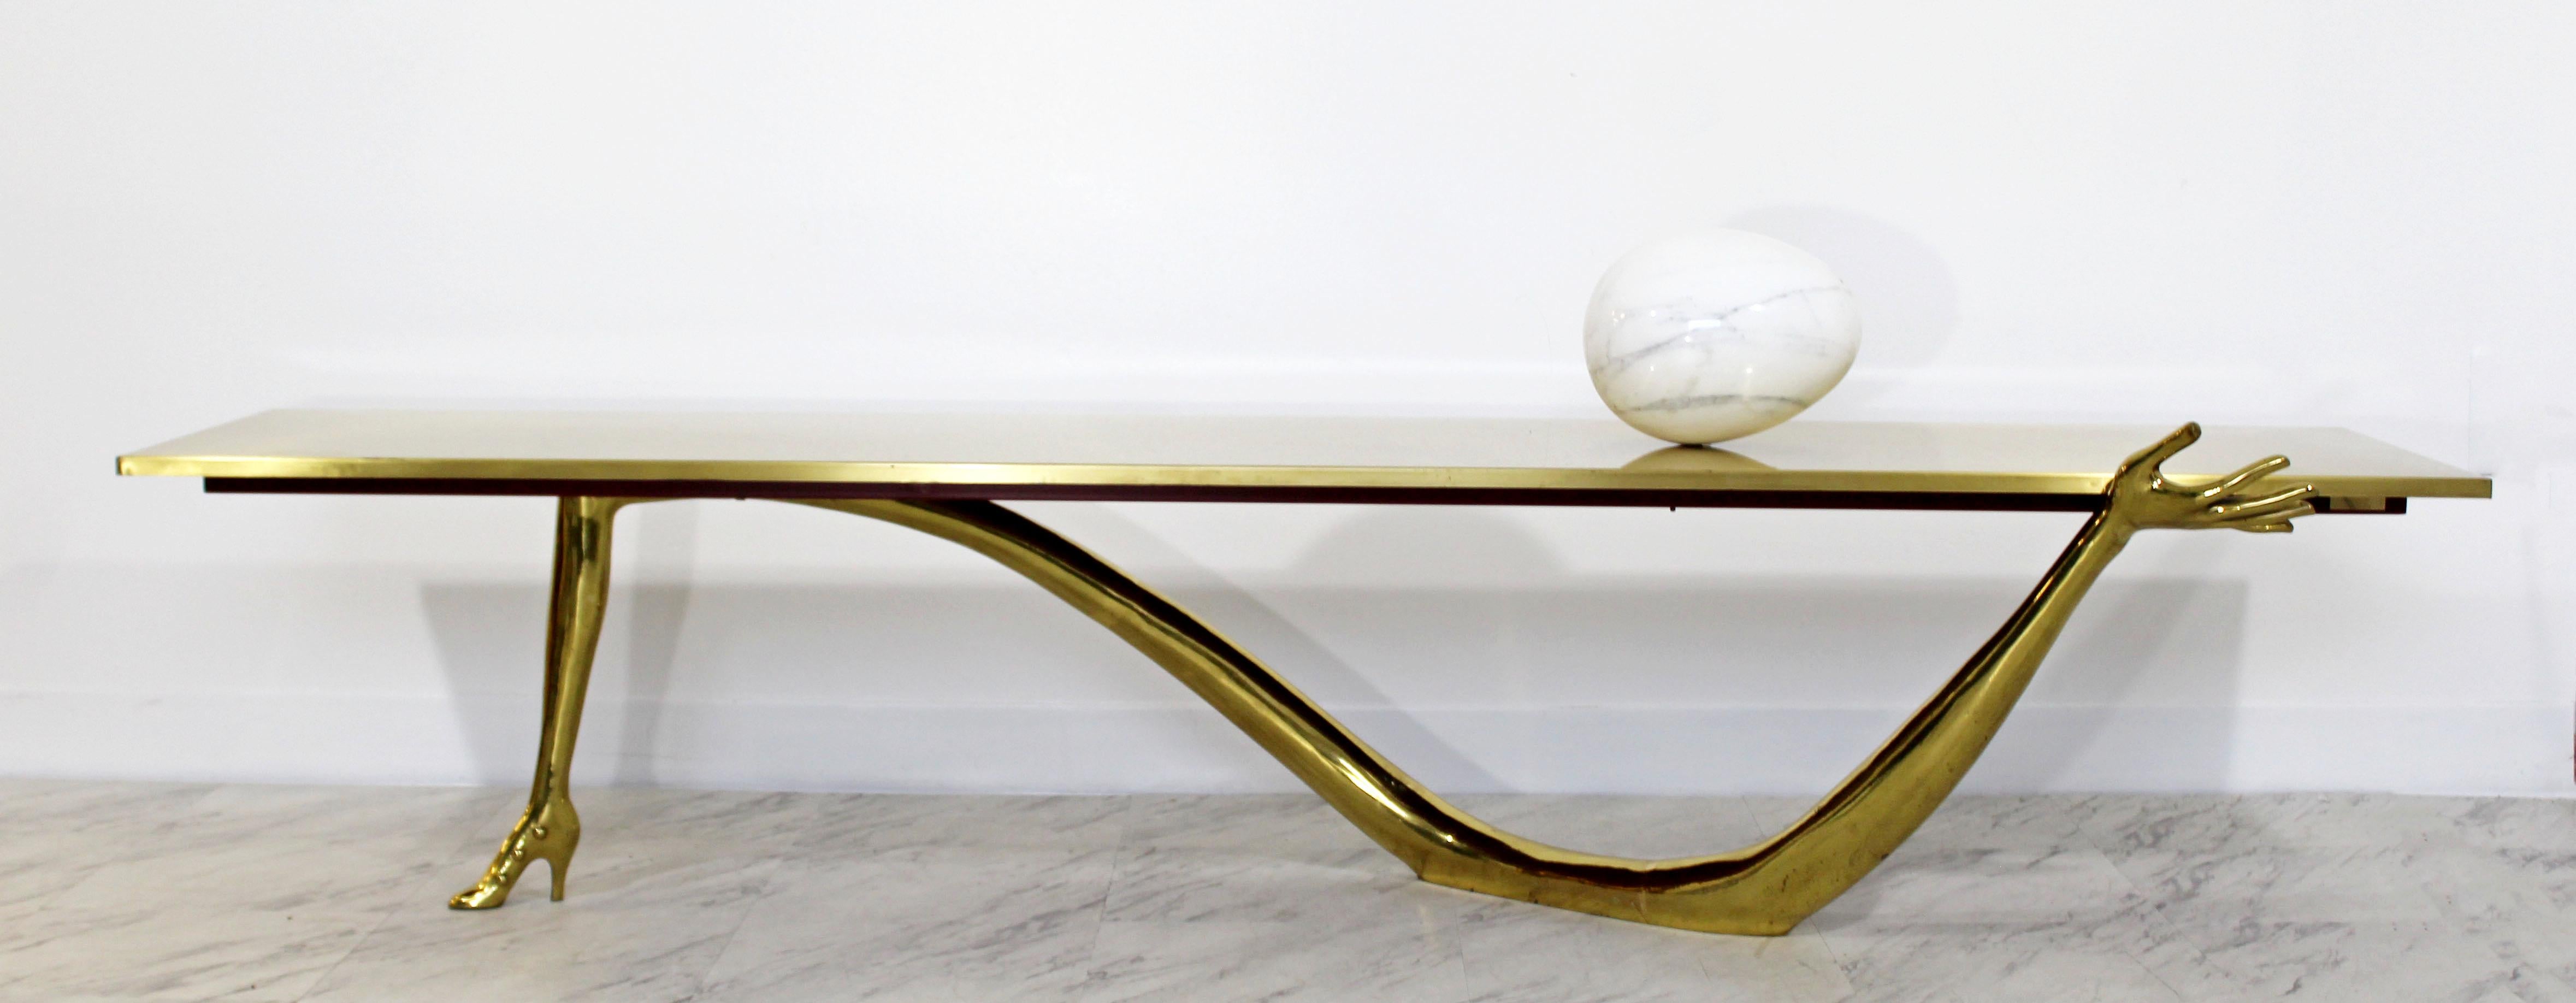 For your consideration is an original Leda, brushed brass varnished, Surrealist, low coffee table, with a Carrara marble egg, designed by Salvador Dali, circa 1935, made in Spain circa the 1990s and numbered 40. In good condition with wear